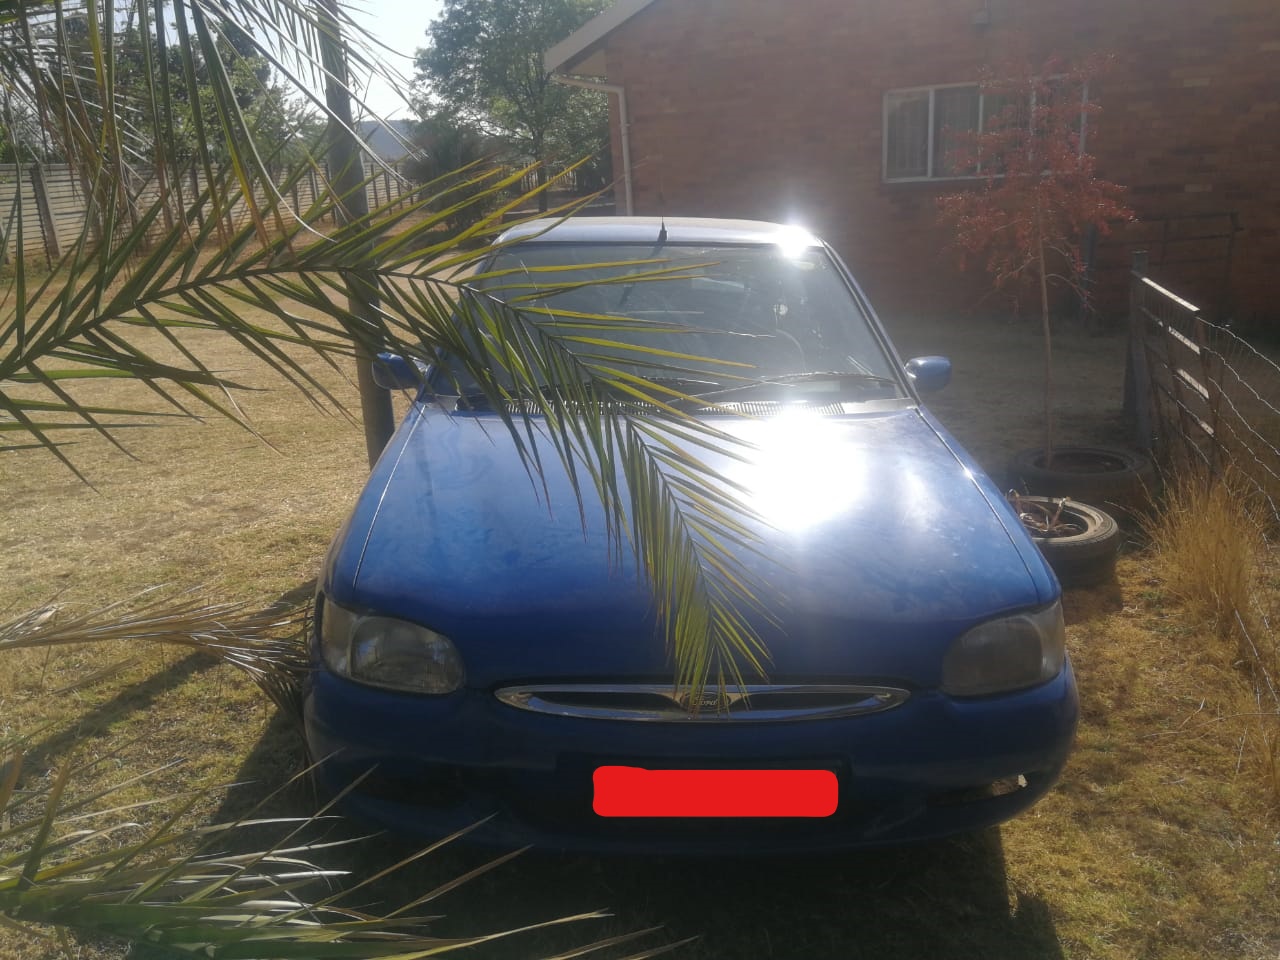 Ford Escort 1998 For sale